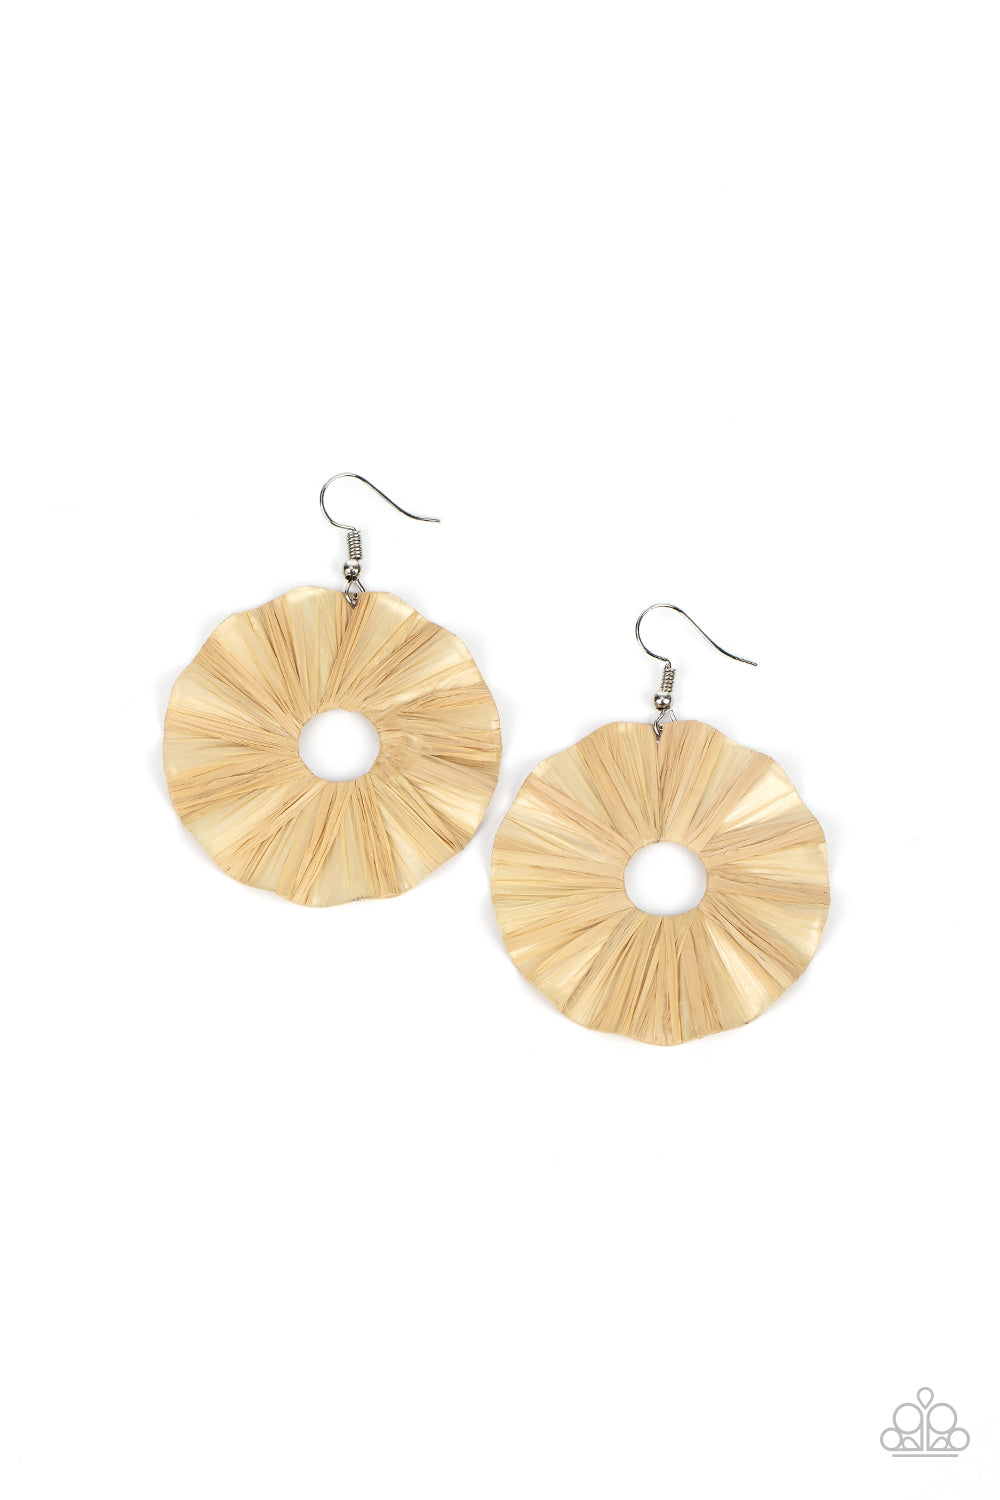 Shiny tan crepe-like paper is wrapped around a rippling round disc, creating a modern display. Earring attaches to a standard fishhook fitting.